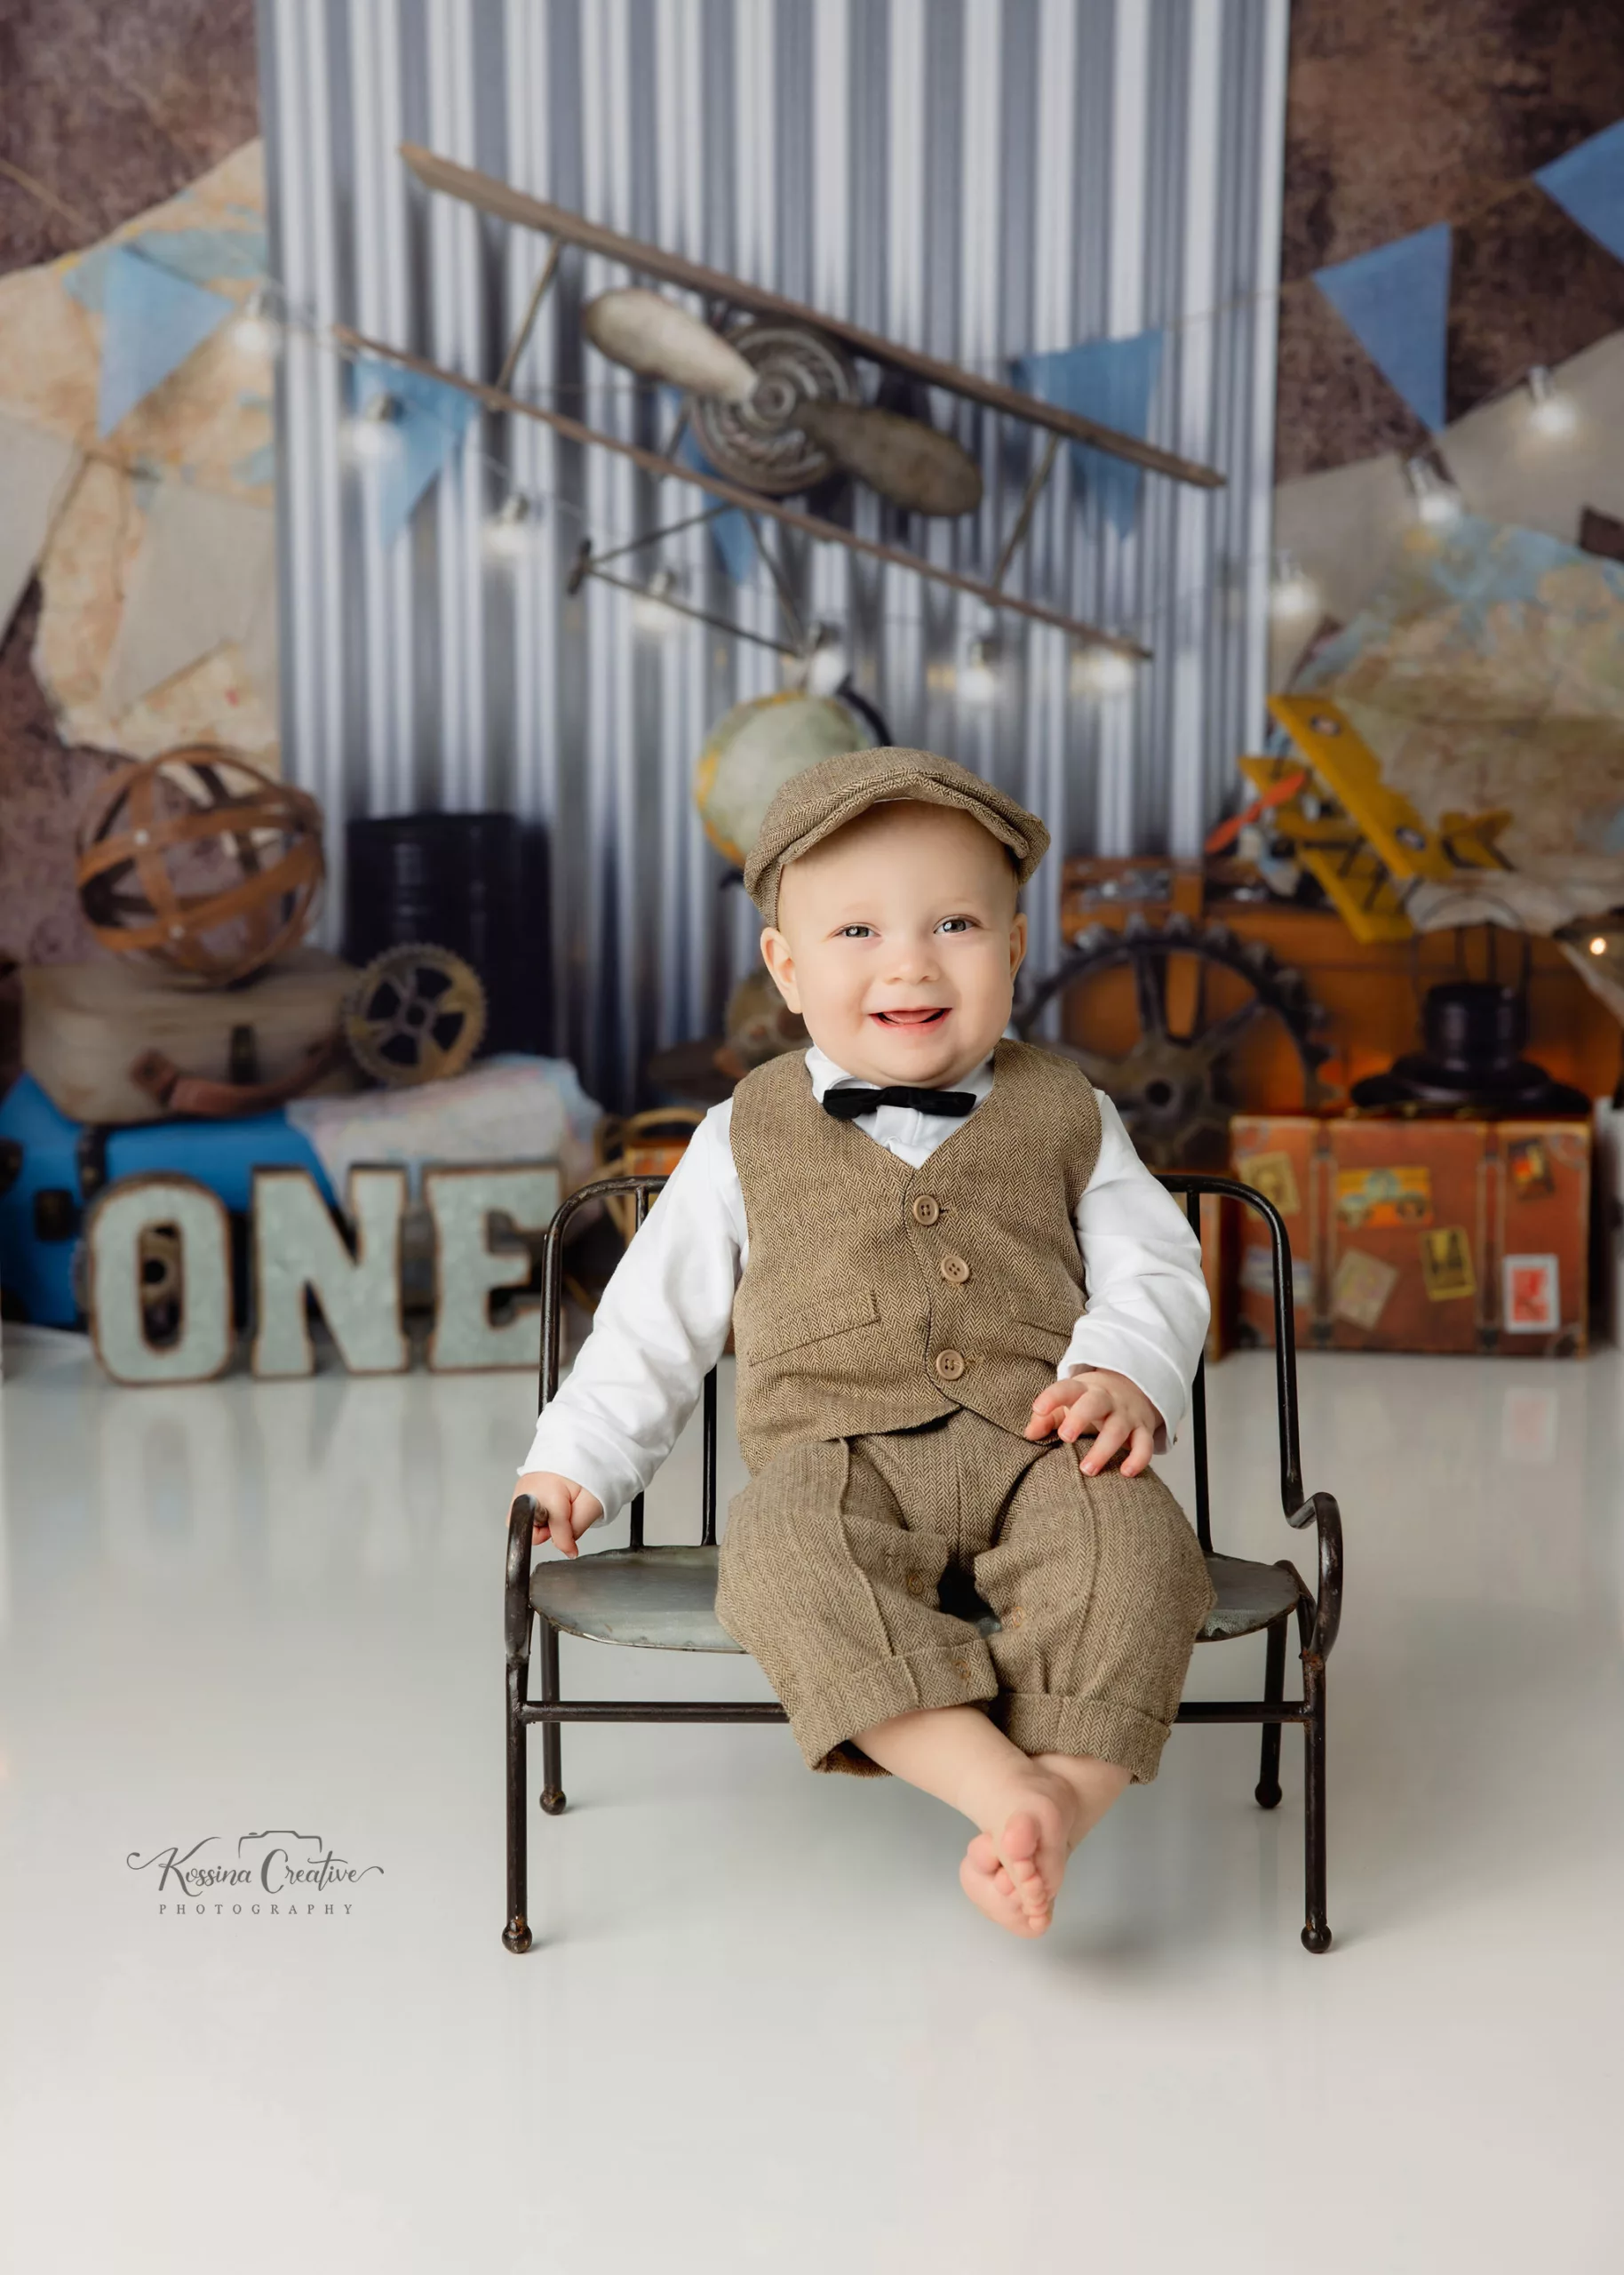 Orlando Boy Cake Smash 1st Birthday Photographer Photo Studio old time airplane metal bench with baby invest bowtie newsie hat laughing travel suitcase